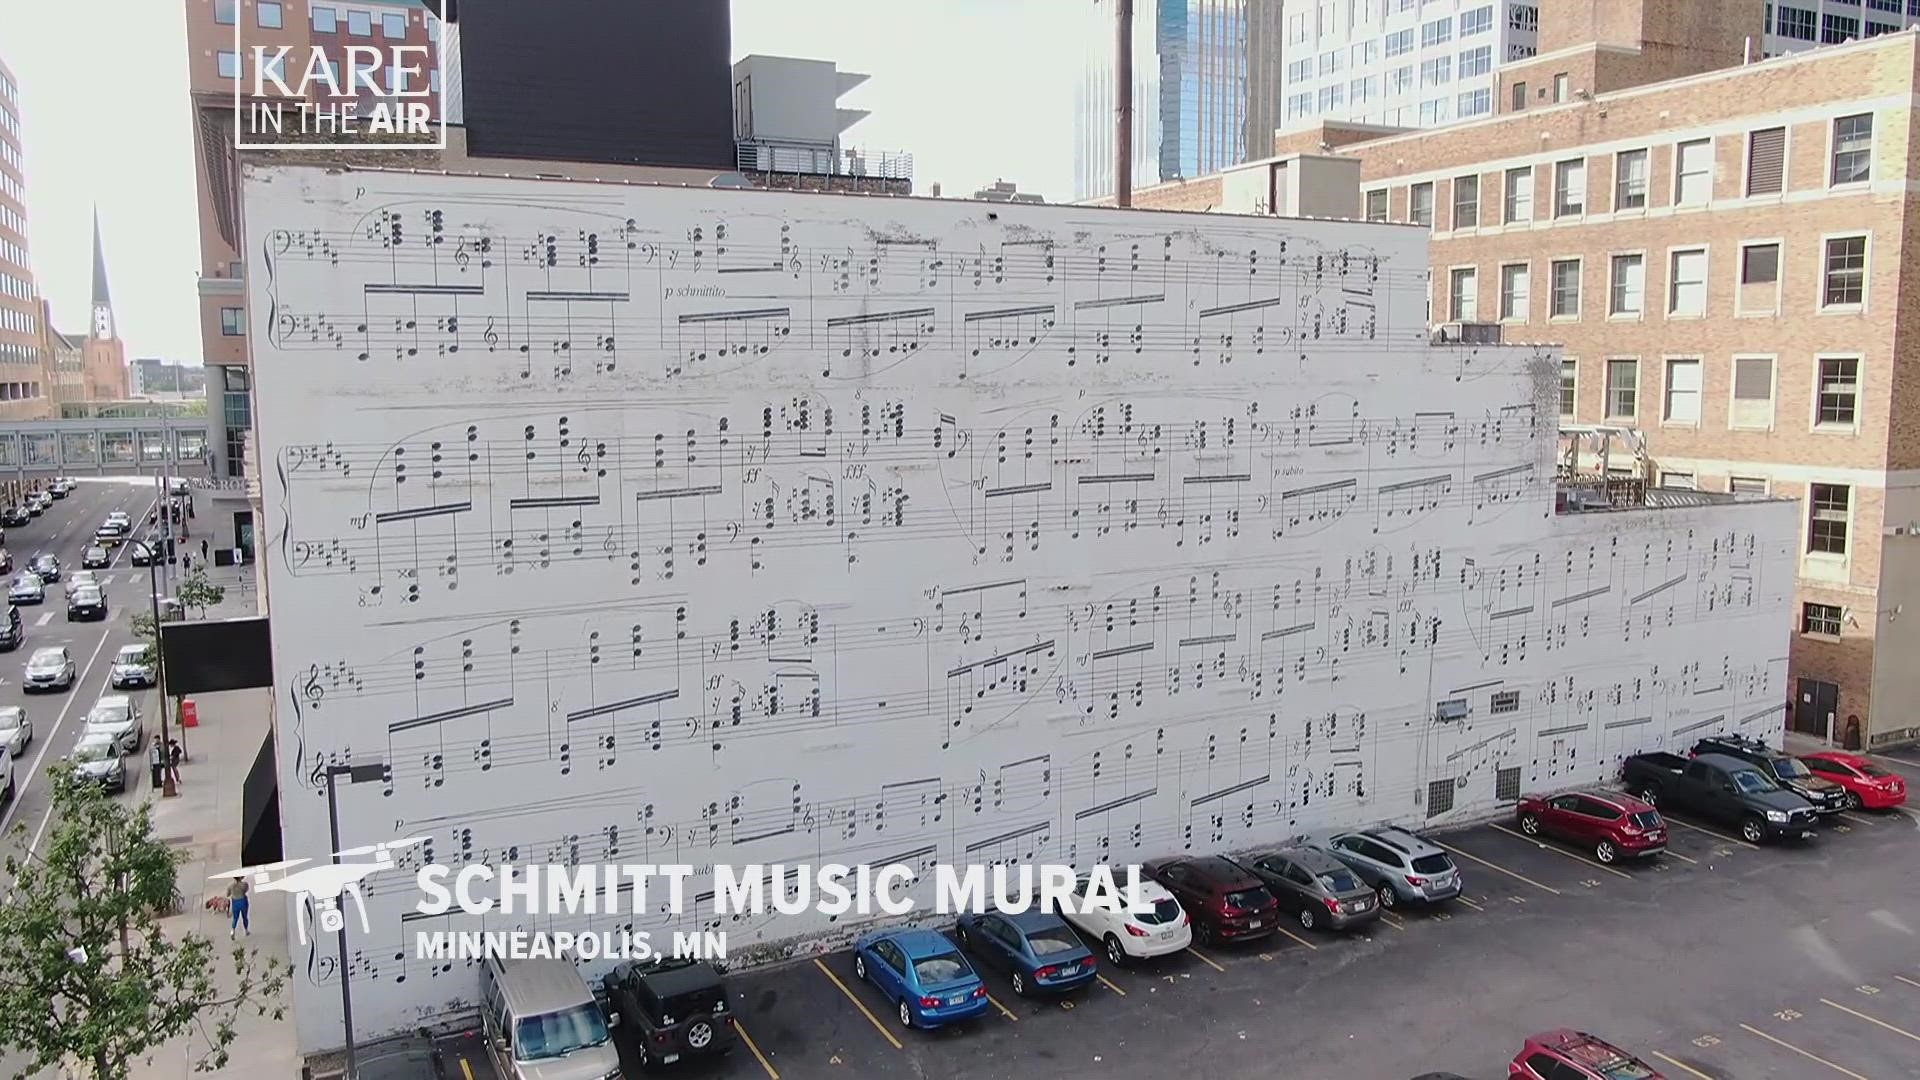 Our drone series continues its mural tour with visits to two pieces of giant art in downtown Minneapolis: The Music Wall, and Gluek's Venice mural.